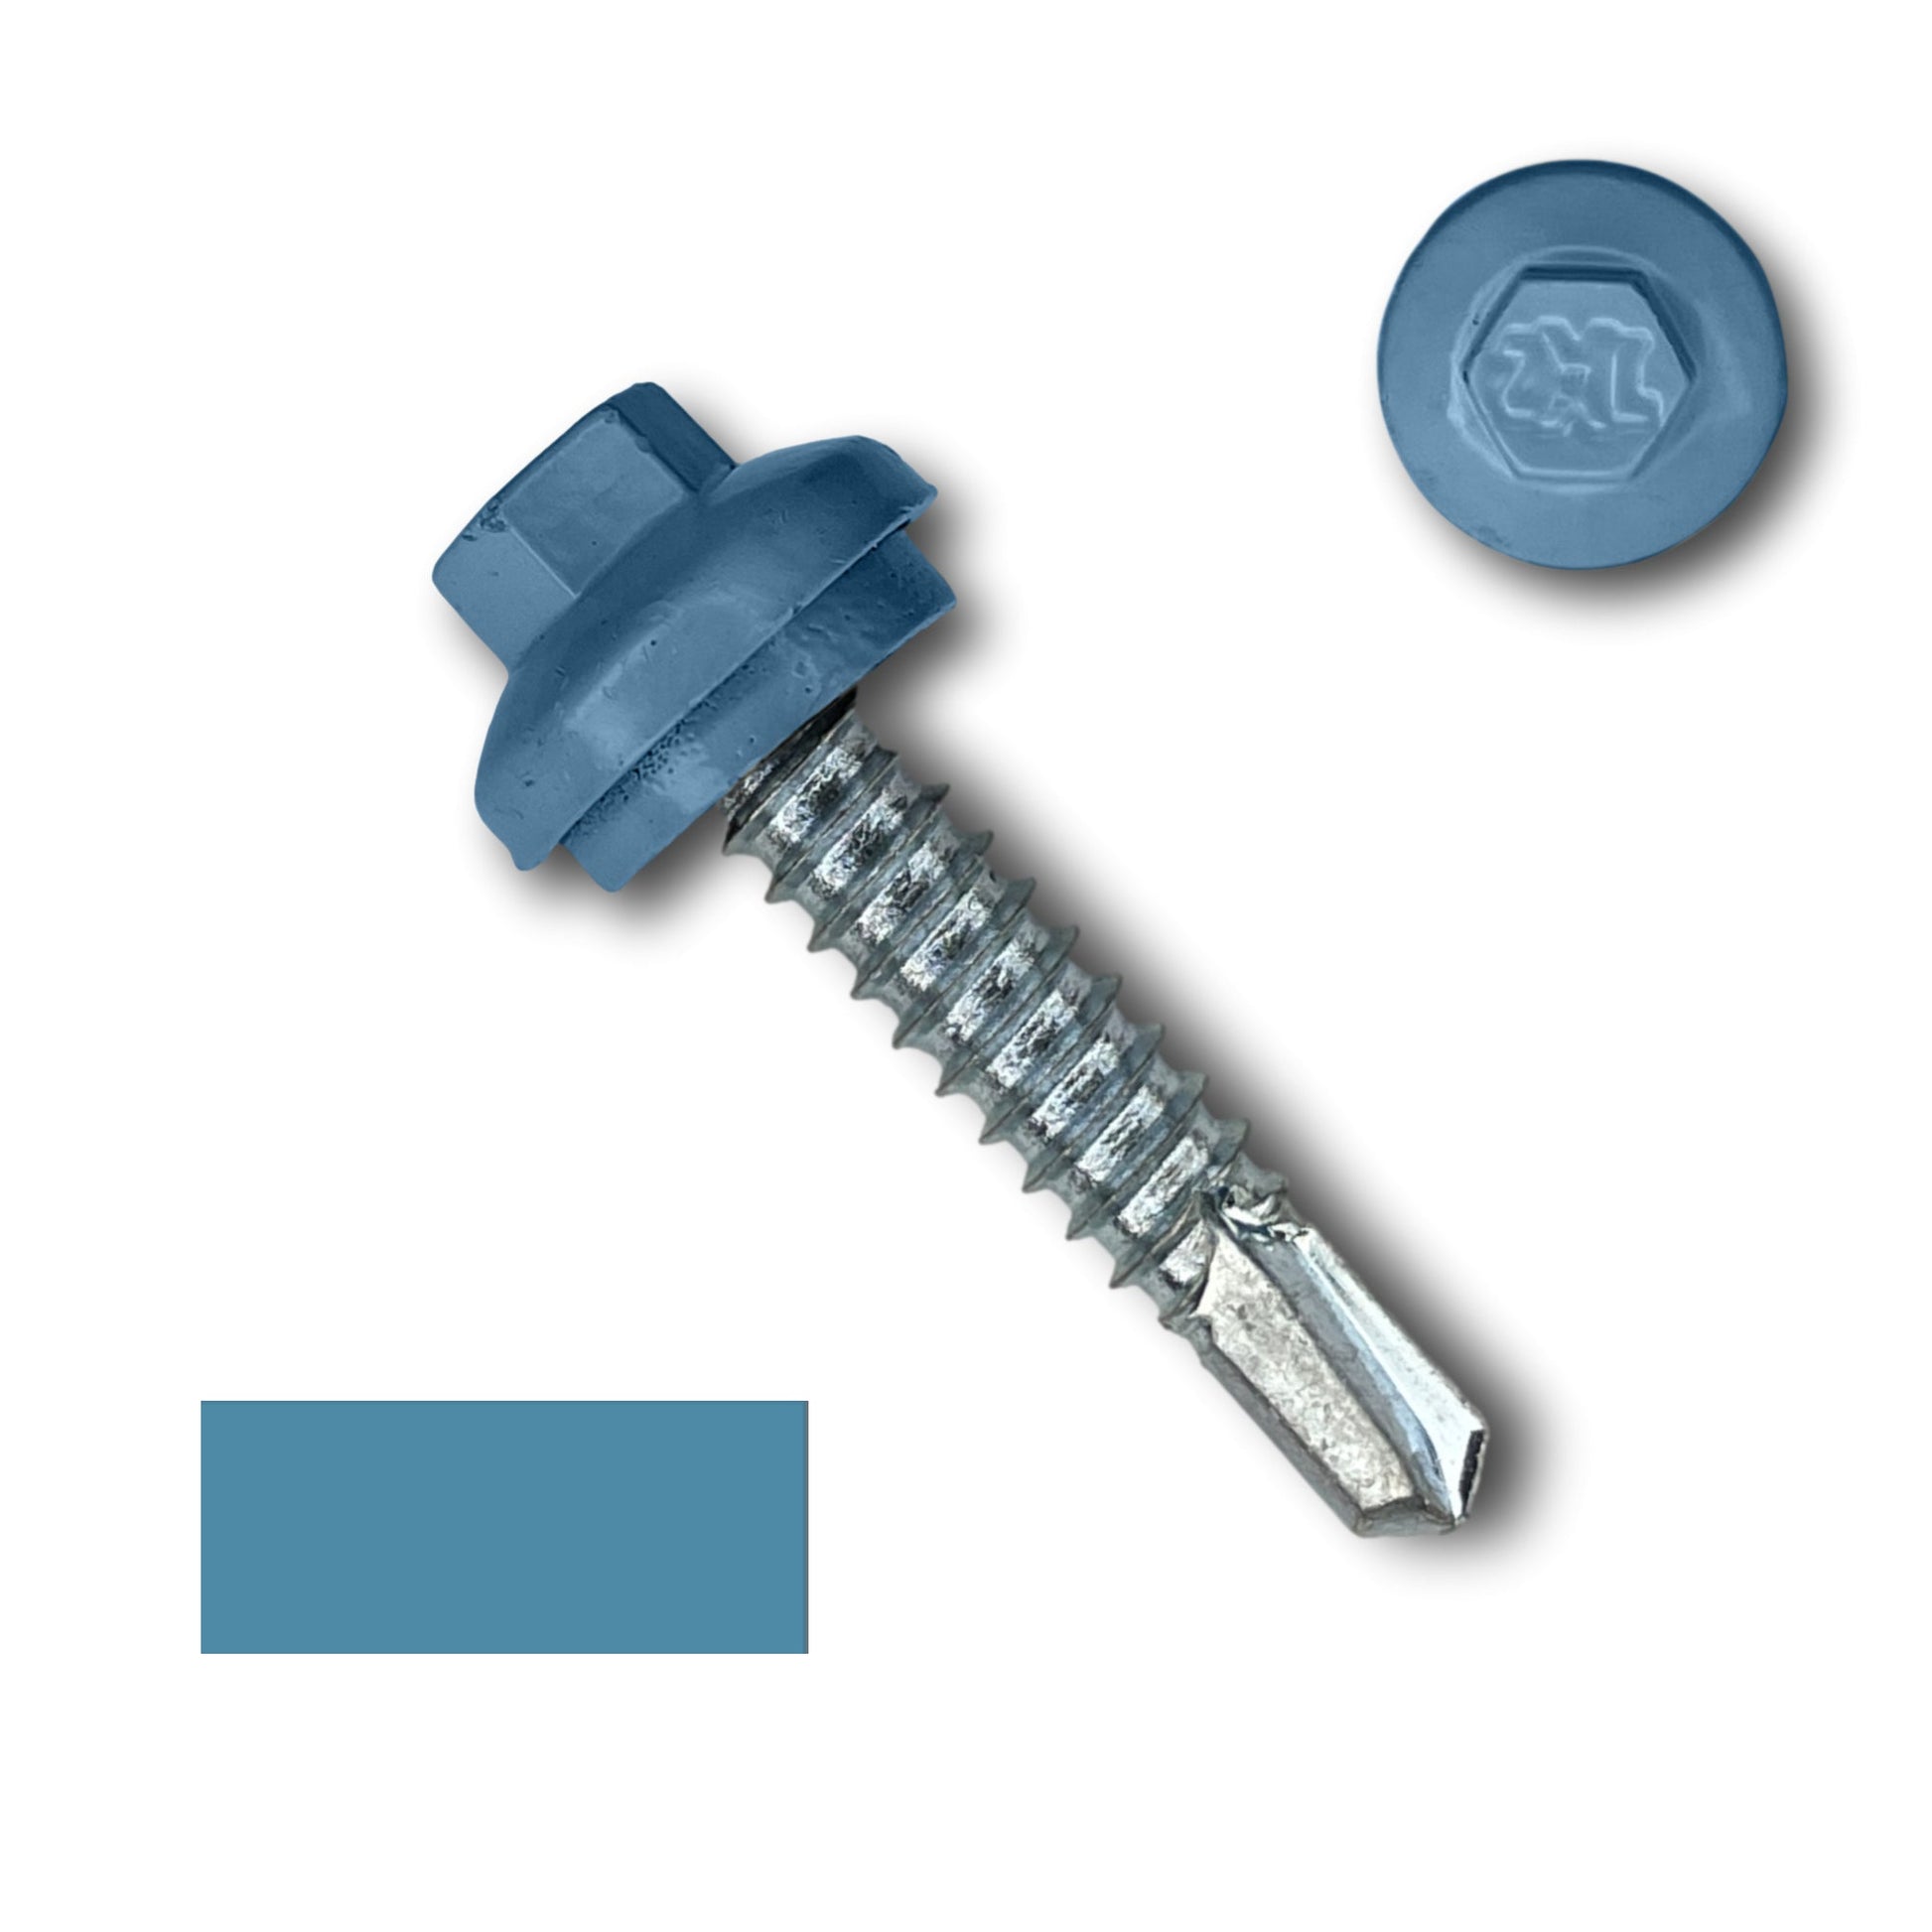 A blue #14 x 1.25" ZXL Dome Cap Metal Building Screw (Metal-to-Metal), Self-Drilling by Perma Cover with a washer is shown in close-up. An additional image inset displays the top view of the screw head, featuring a hexagon shape and a logo imprint. A color swatch matching the screw's head is also displayed to the left, ideal for metal building screws available in packs of 250, 500, or 1000.